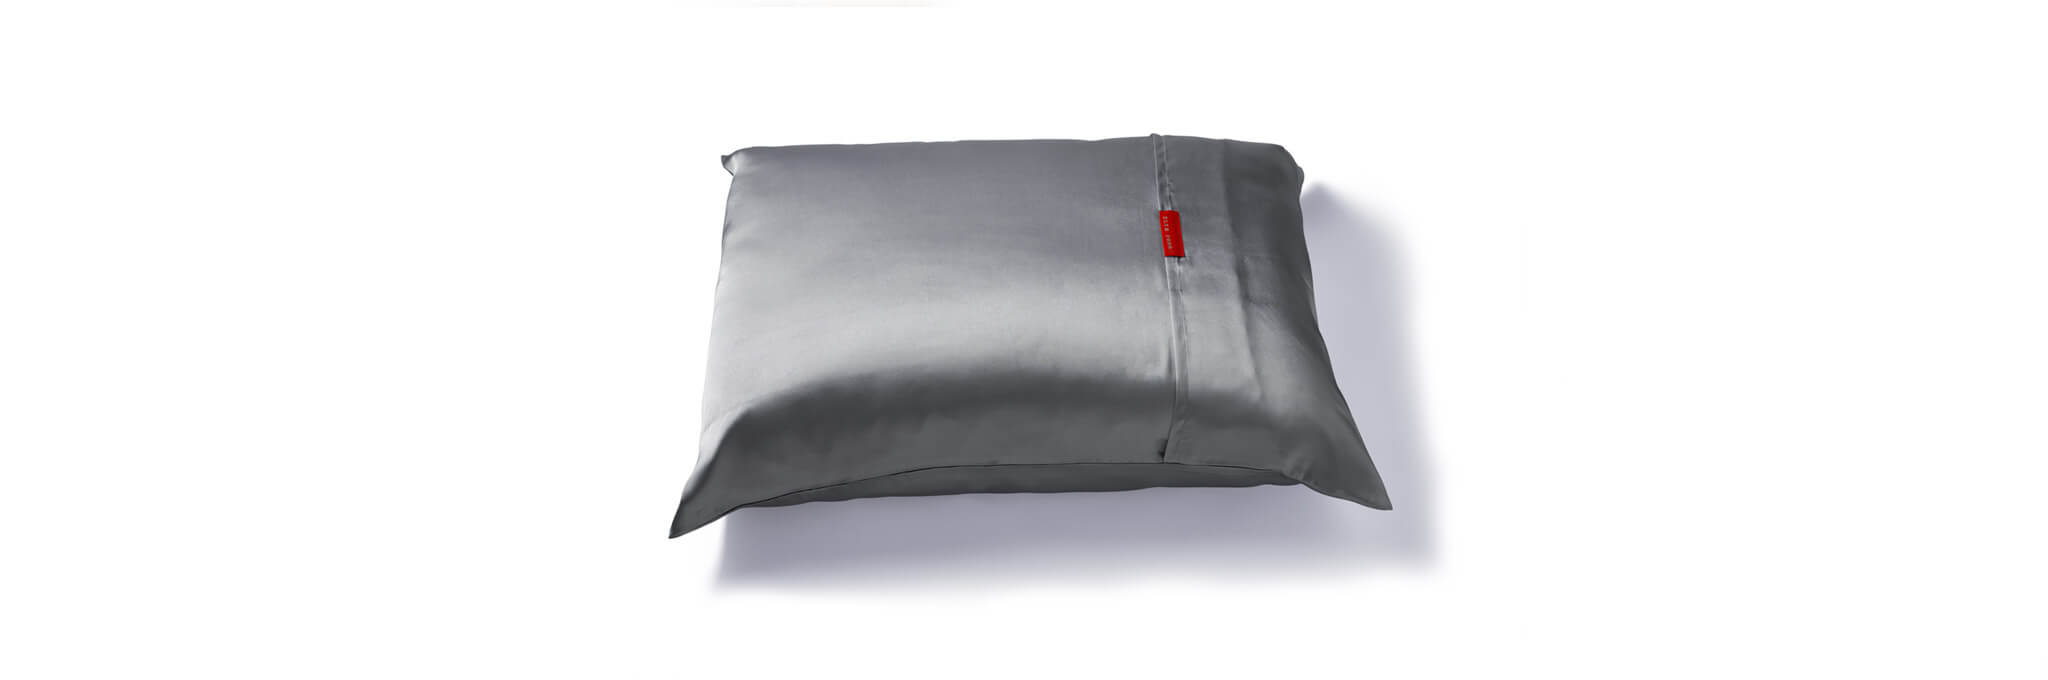 Silver pillow with red tag